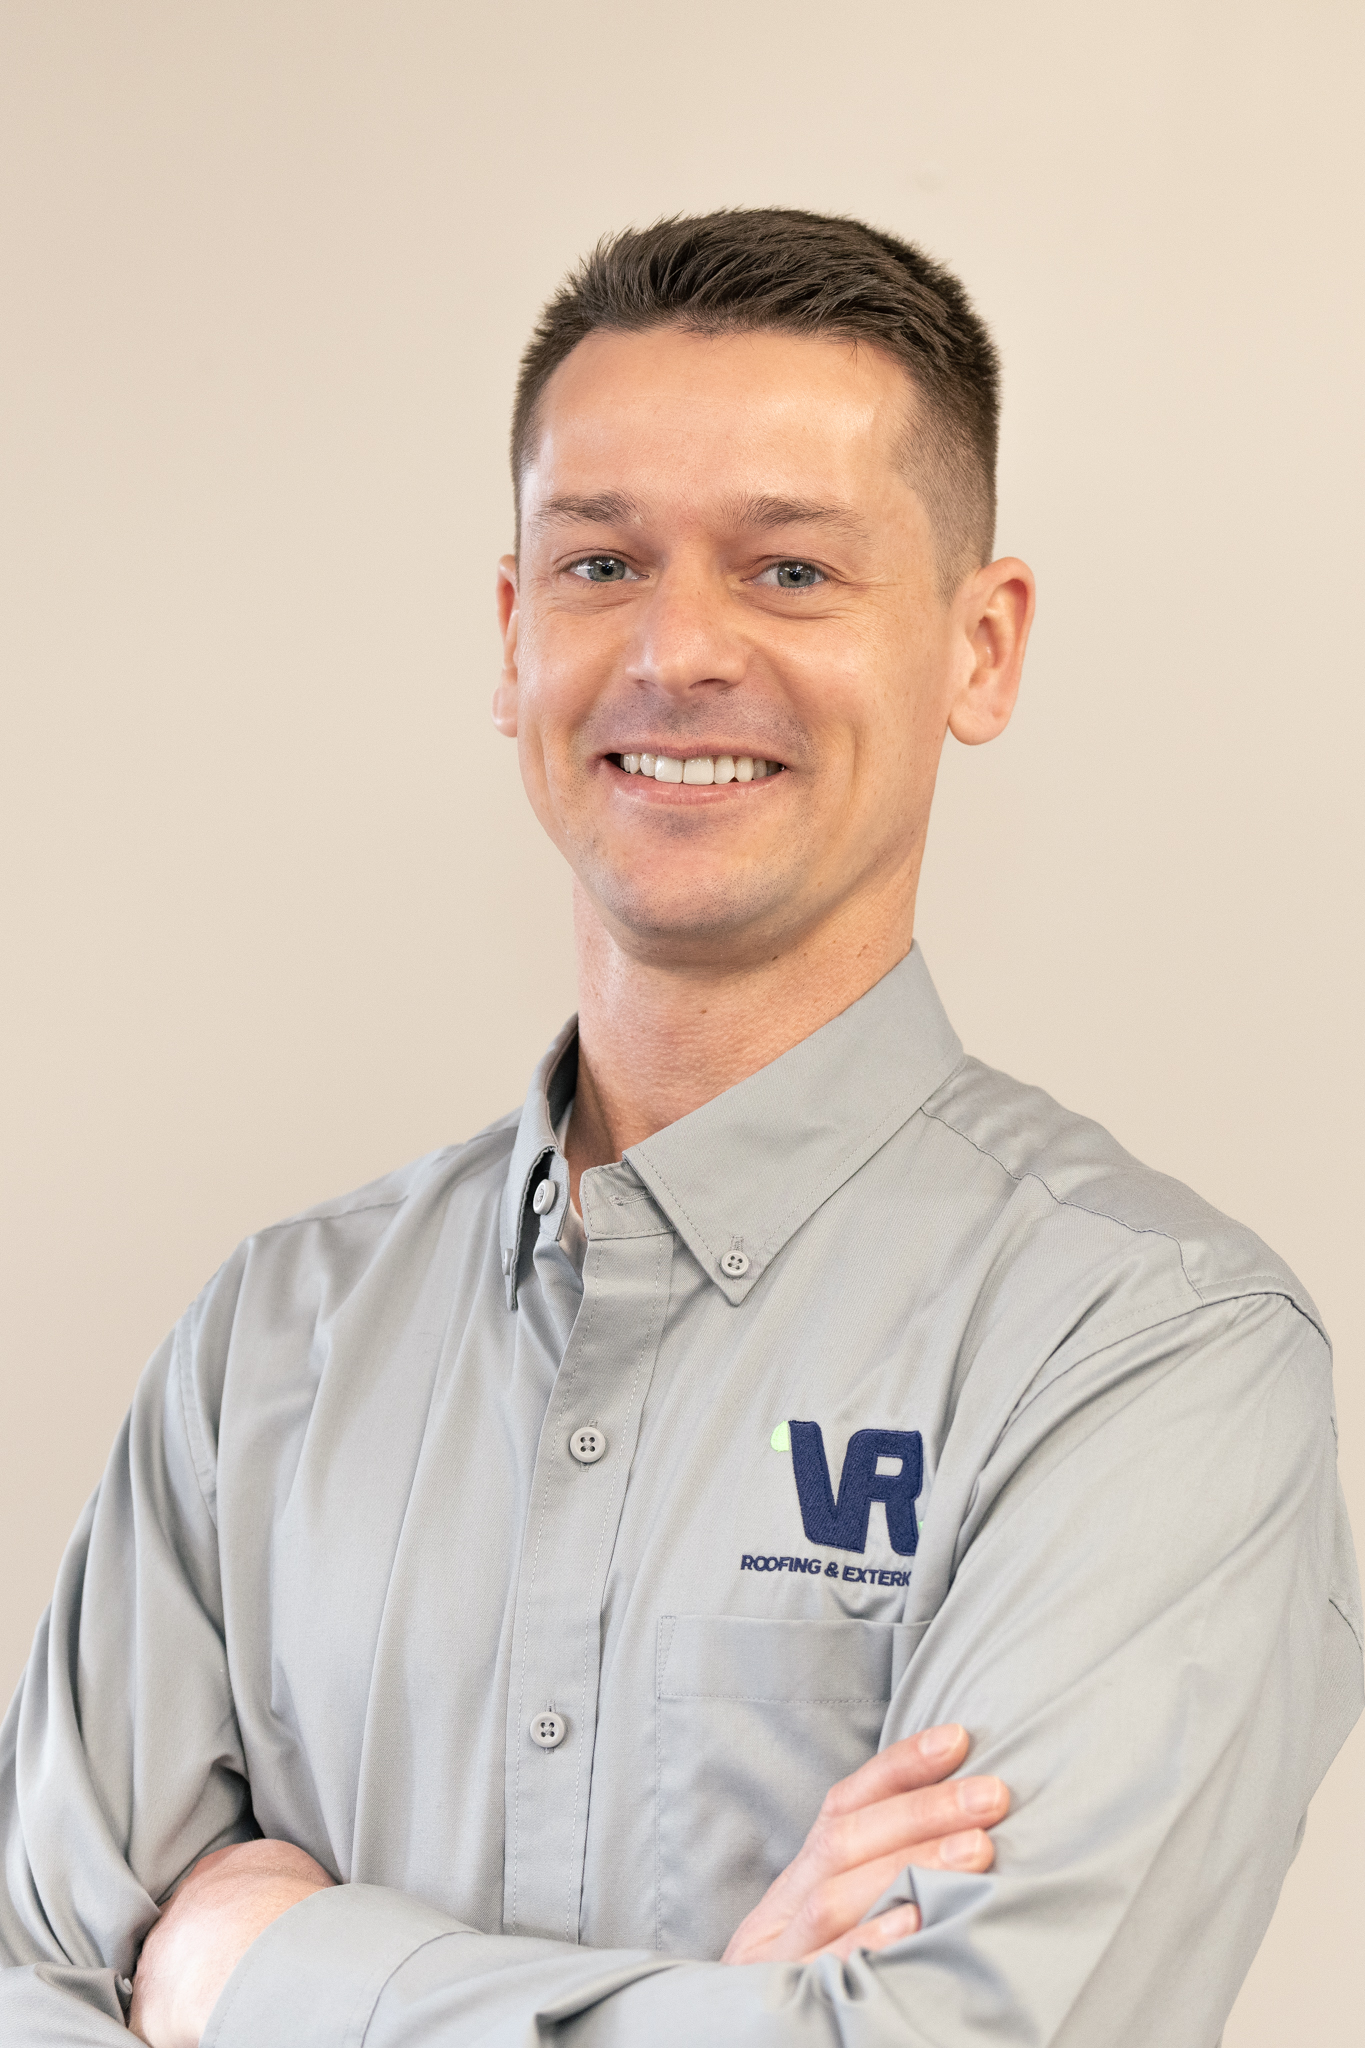 Headshot of Joseph Showalter, Sales Manager/Estimating at Valley Roofing & Exteriors.